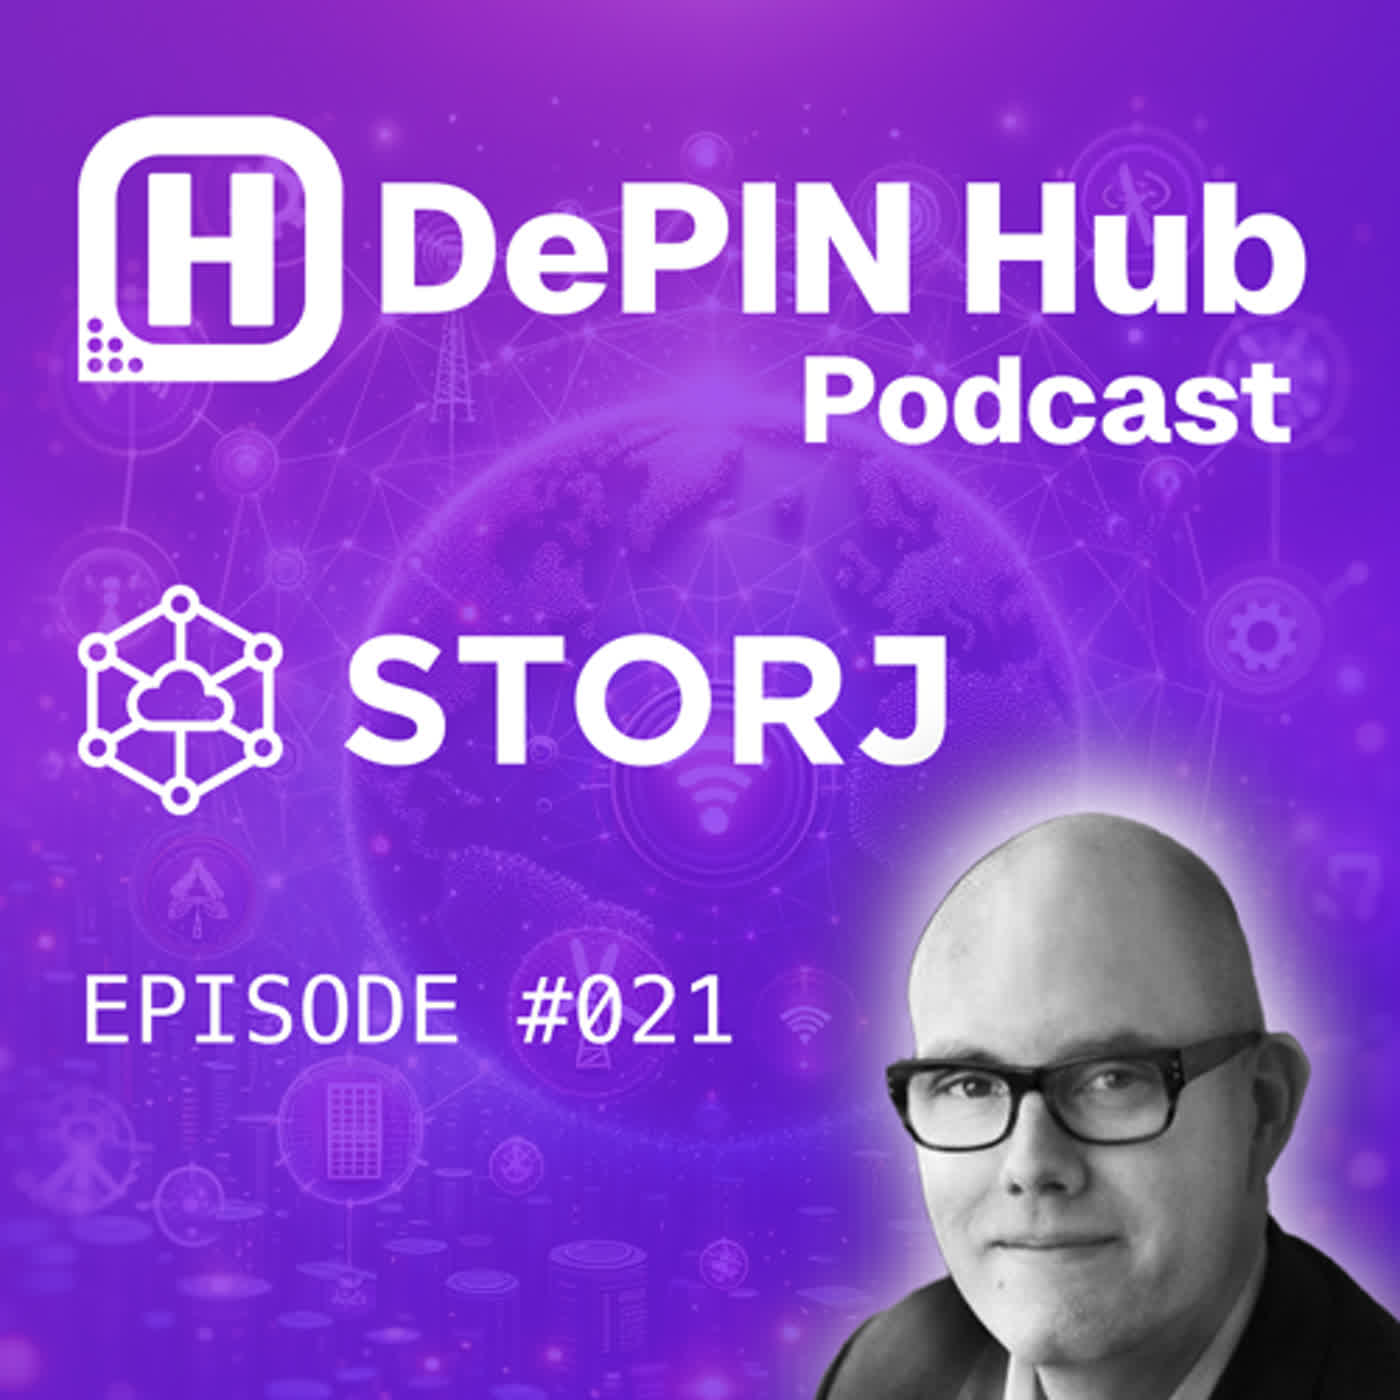 #021 - Storj - A faster, cheaper, and greener alternative to AWS S3